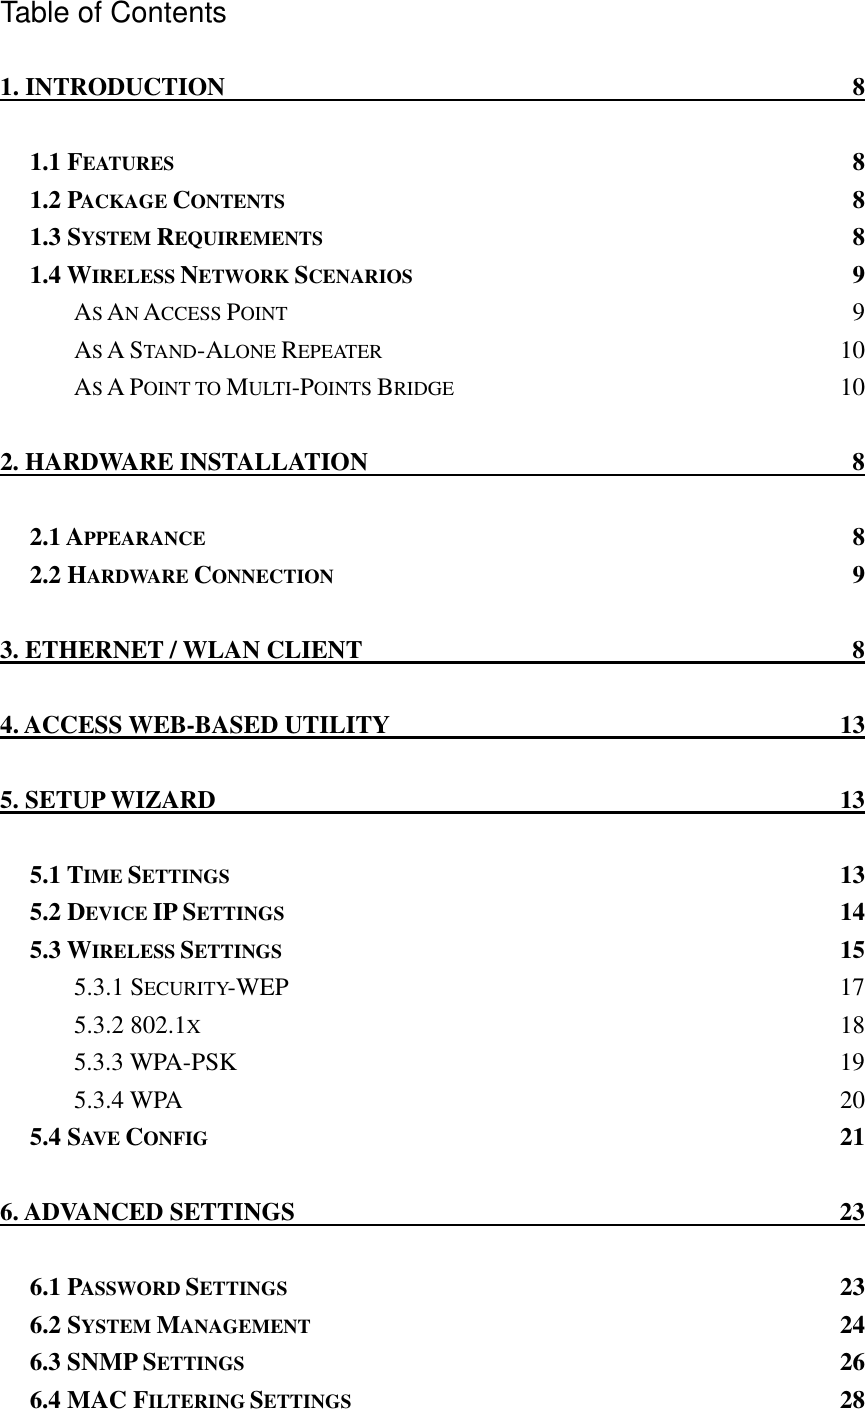 Table of Contents 1. INTRODUCTION  8 1.1 FEATURES 8 1.2 PACKAGE CONTENTS 8 1.3 SYSTEM REQUIREMENTS 8 1.4 WIRELESS NETWORK SCENARIOS 9 AS AN ACCESS POINT 9 AS A STAND-ALONE REPEATER 10 AS A POINT TO MULTI-POINTS BRIDGE 10 2. HARDWARE INSTALLATION  8 2.1 APPEARANCE 8 2.2 HARDWARE CONNECTION 9 3. ETHERNET / WLAN CLIENT  8 4. ACCESS WEB-BASED UTILITY  13 5. SETUP WIZARD  13 5.1 TIME SETTINGS 13 5.2 DEVICE IP SETTINGS 14 5.3 WIRELESS SETTINGS 15 5.3.1 SECURITY-WEP 17 5.3.2 802.1X 18 5.3.3 WPA-PSK  19 5.3.4 WPA  20 5.4 SAV E   CONFIG 21 6. ADVANCED SETTINGS  23 6.1 PASSWORD SETTINGS 23 6.2 SYSTEM MANAGEMENT 24 6.3 SNMP SETTINGS 26 6.4 MAC FILTERING SETTINGS 28 